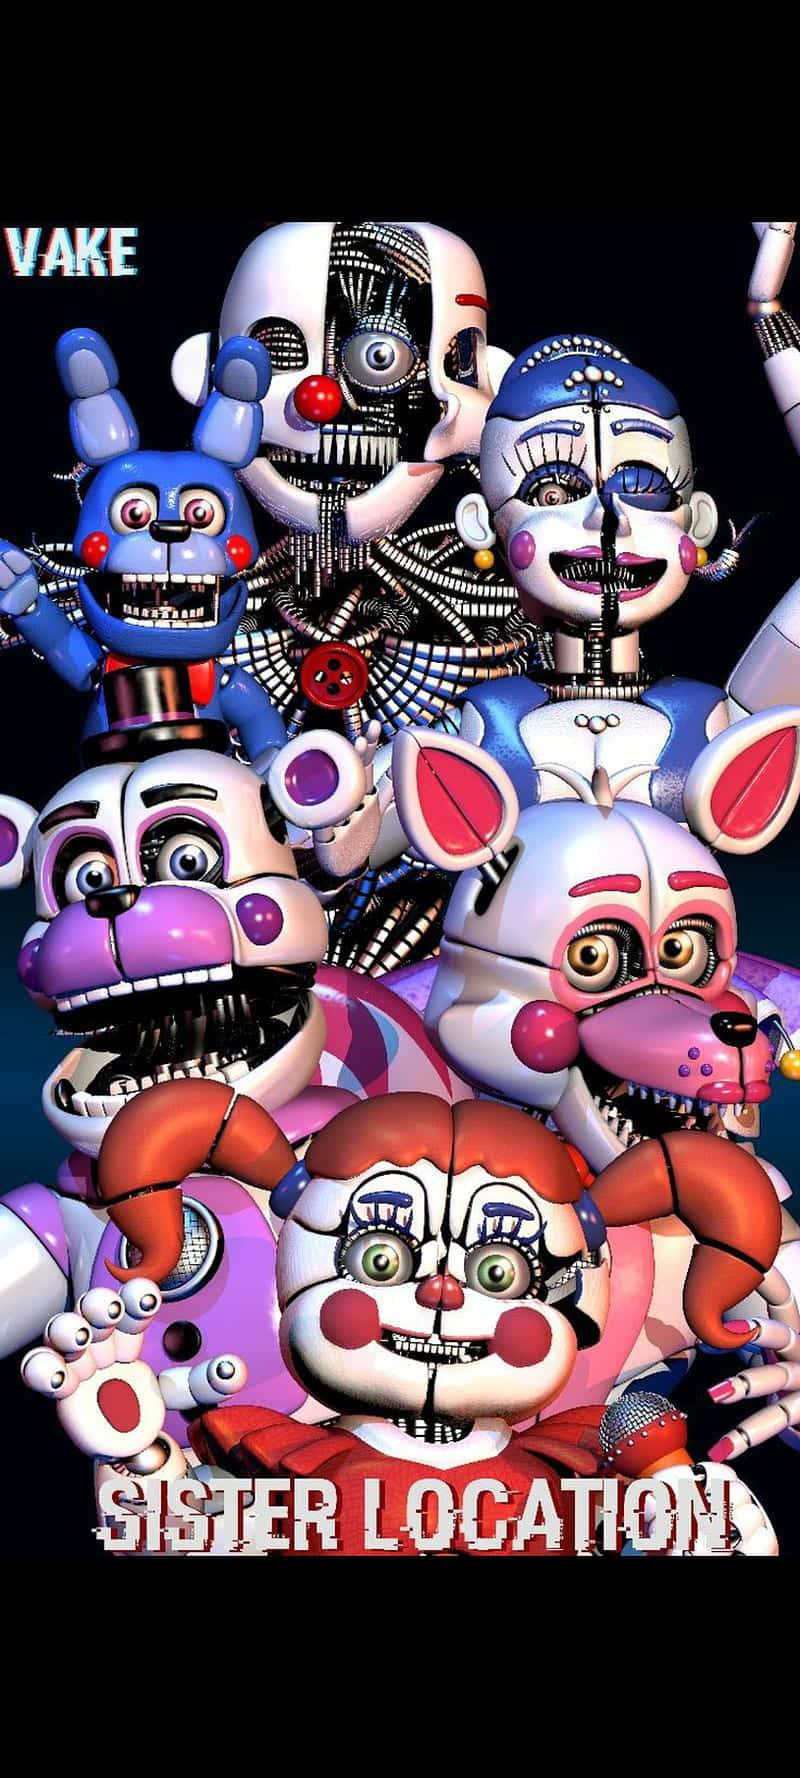 Five Nights At Freddy's: Sister Location Smiling Widely Wallpaper